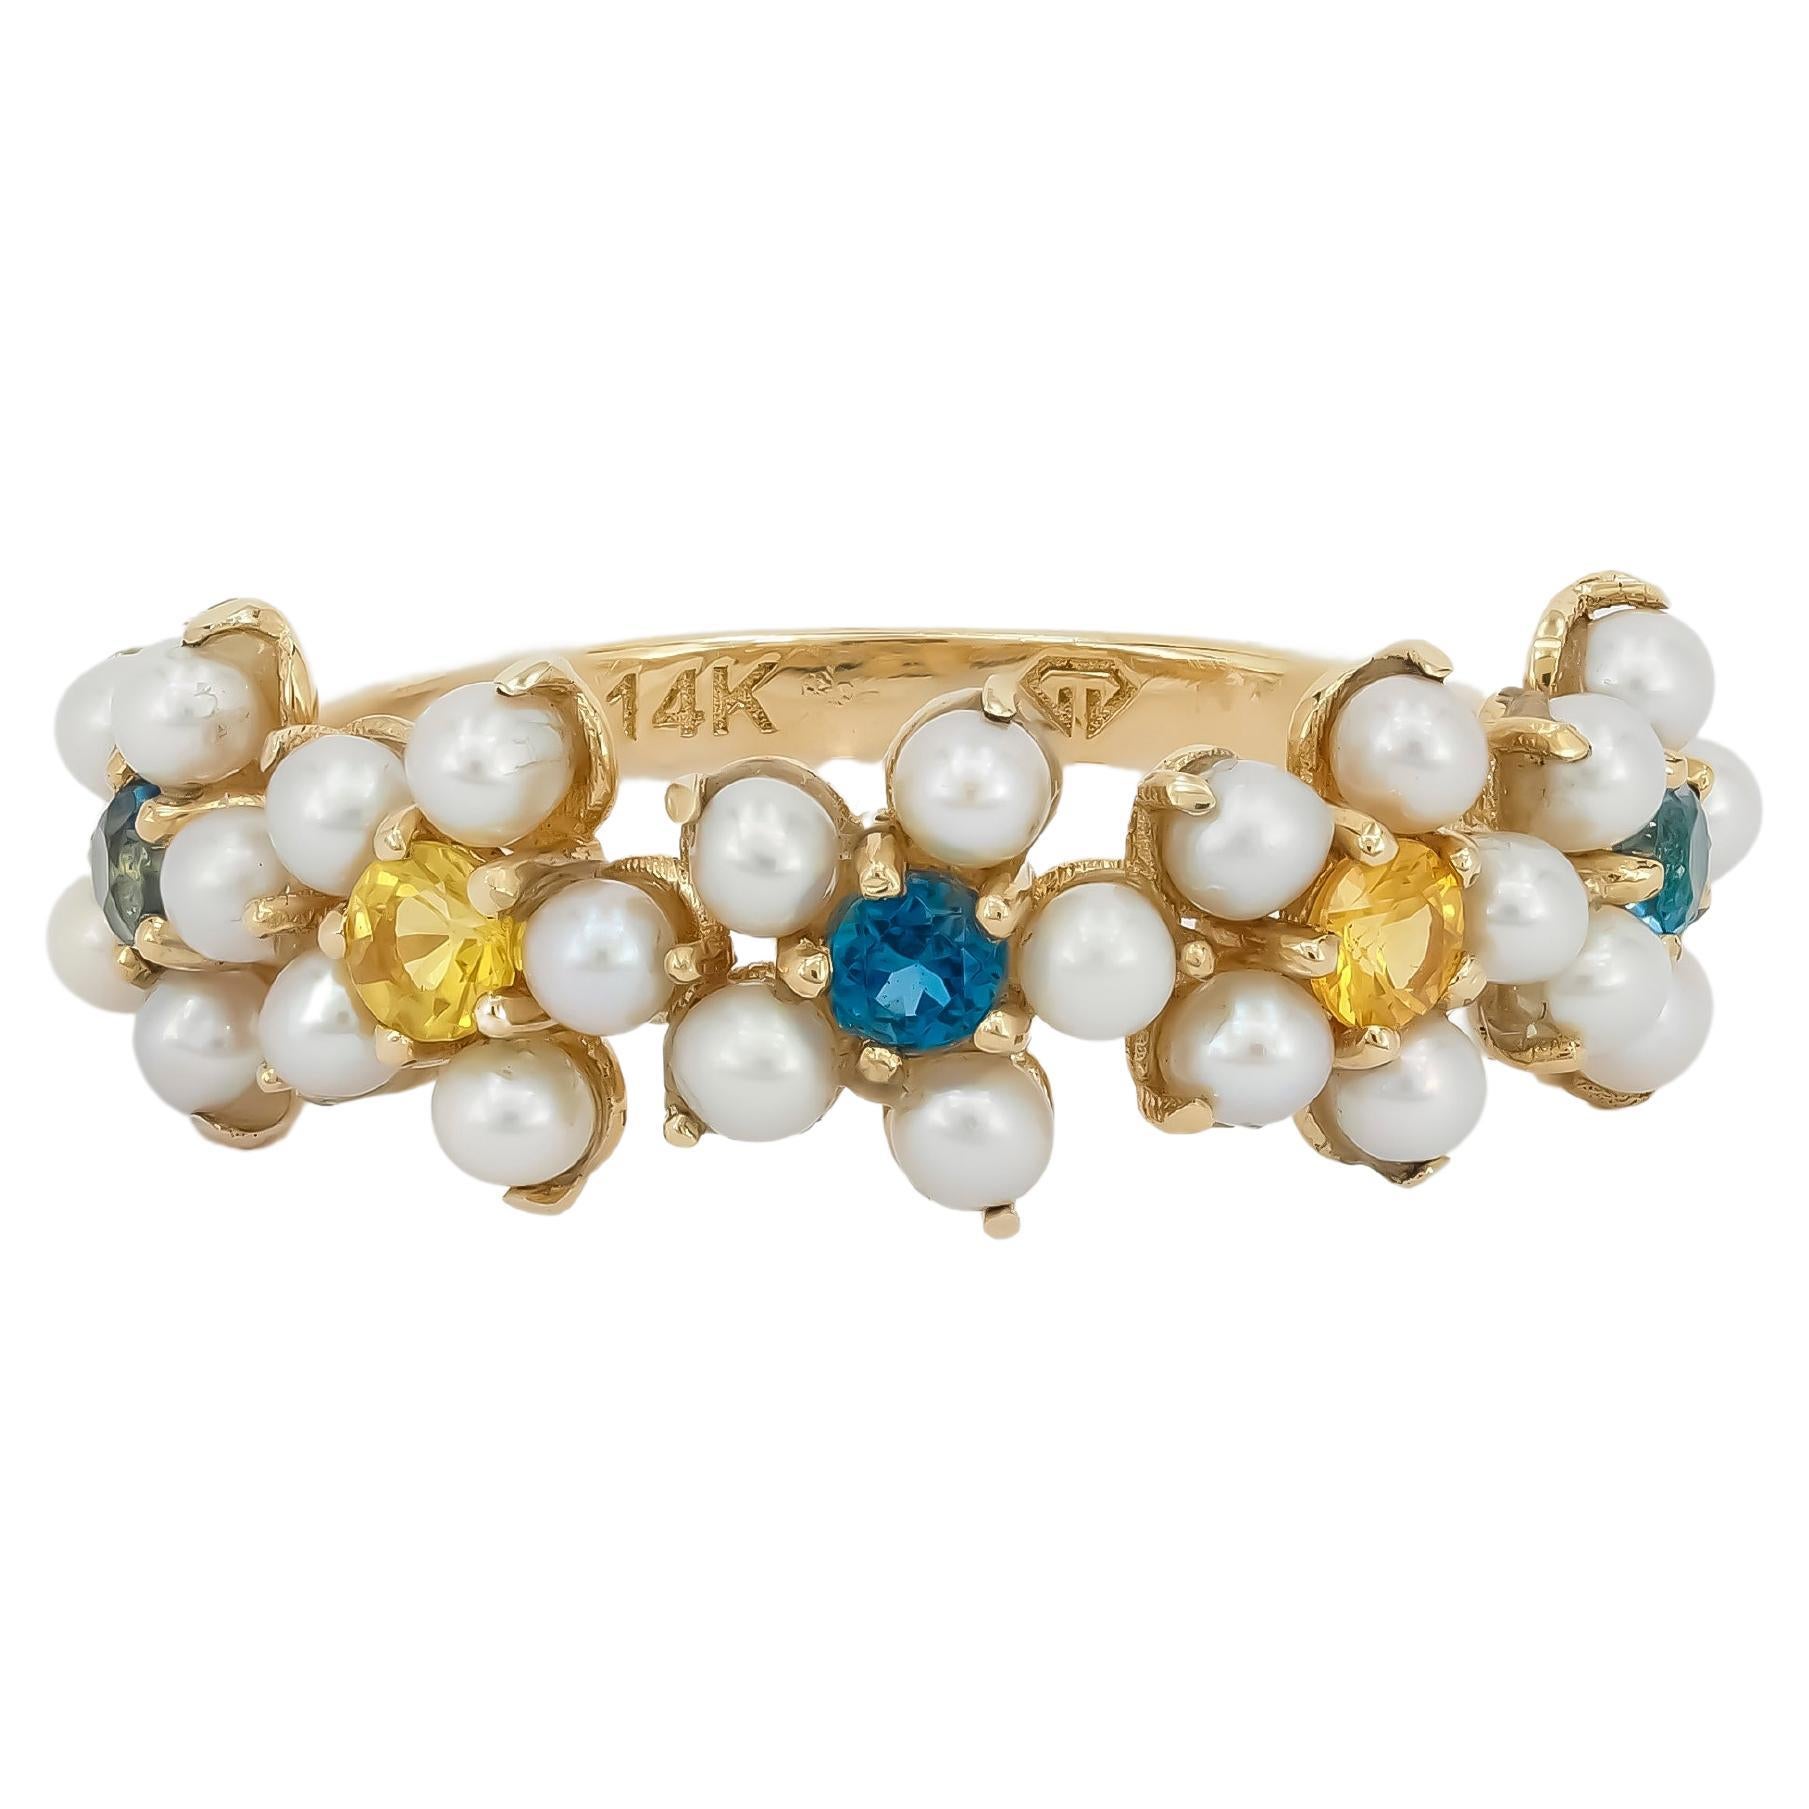 For Sale:  14k Gold Ring with Pearls and Sapphires